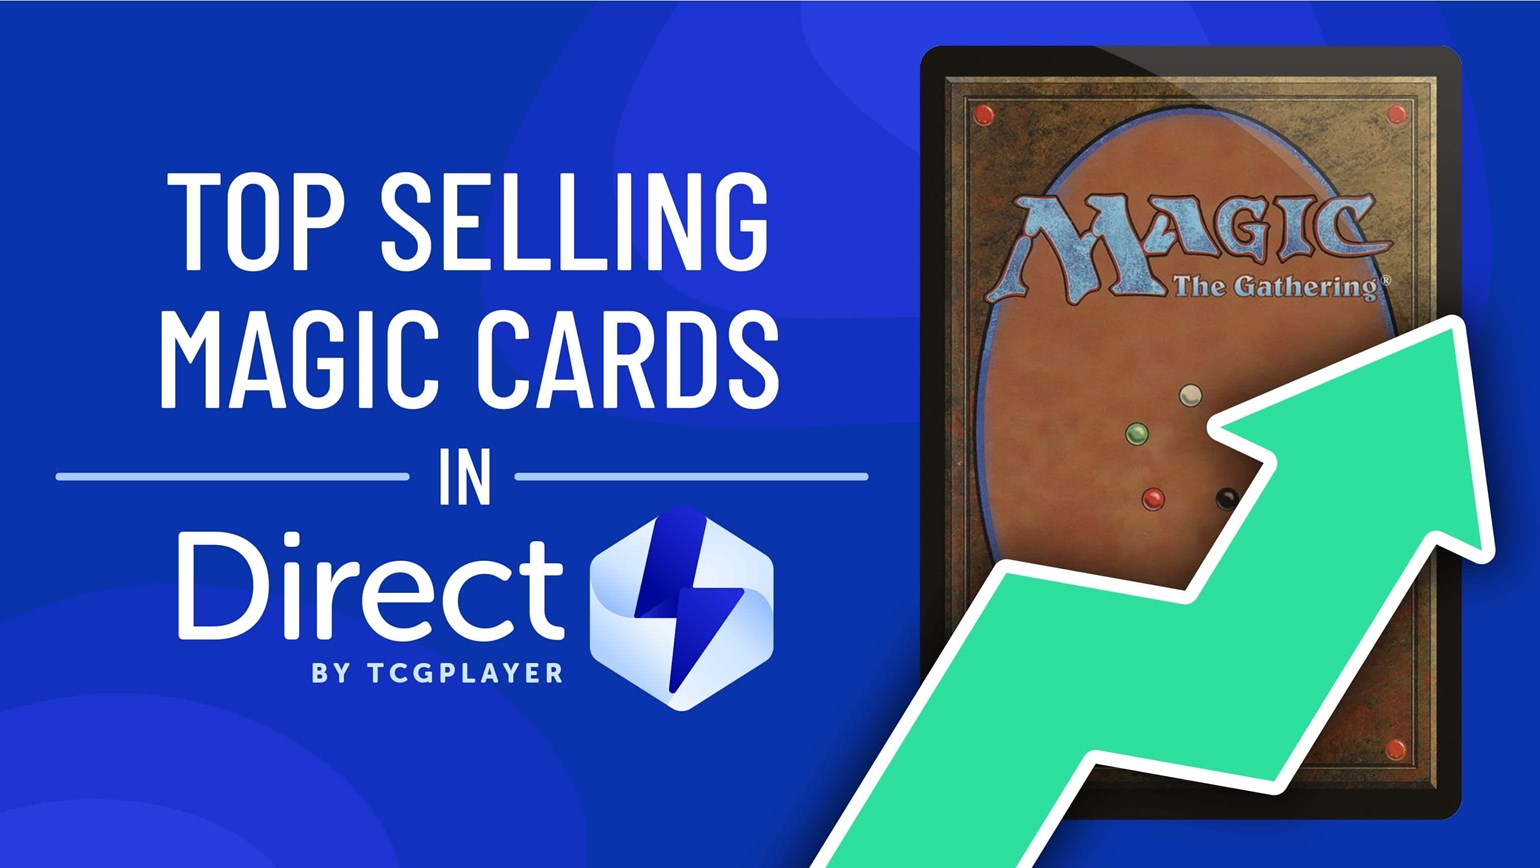 October Top Selling Magic: The Gathering Cards Under $25 in Direct by TCGplayer